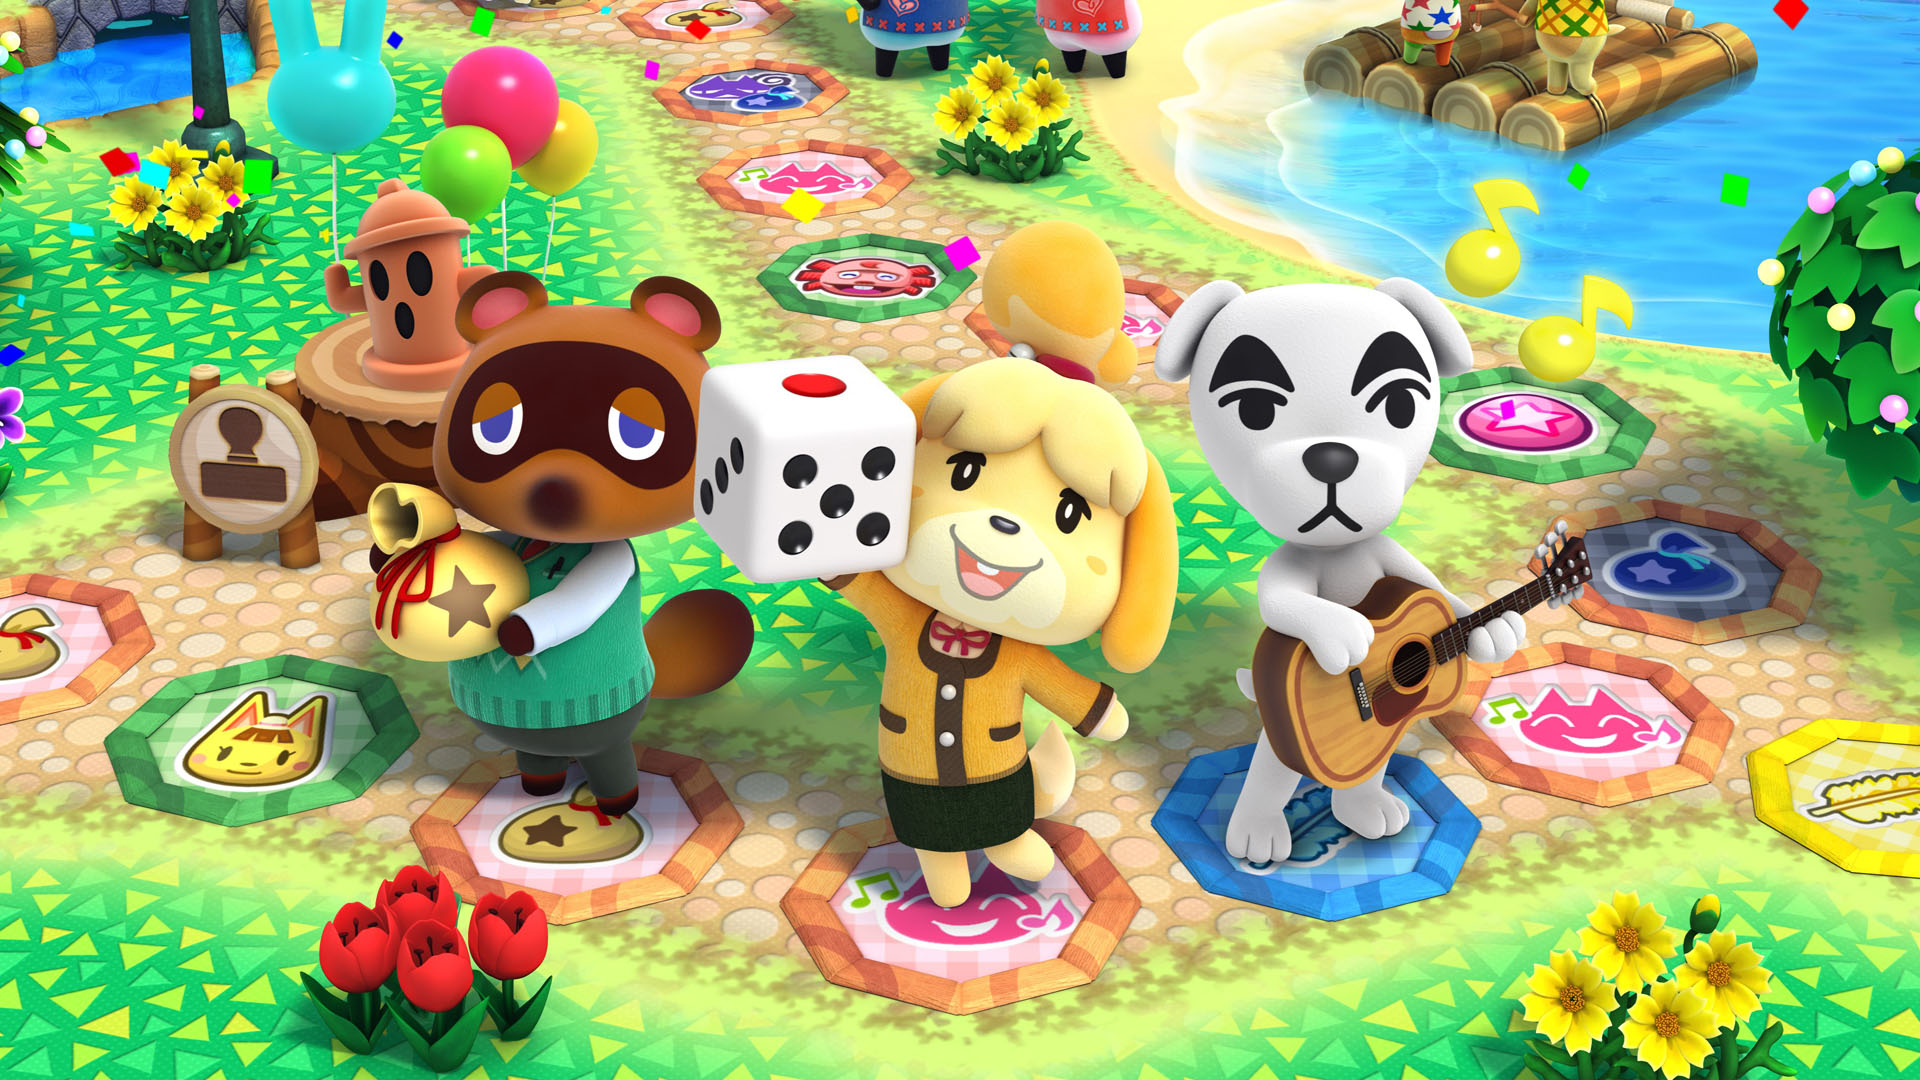 Animal crossing release time